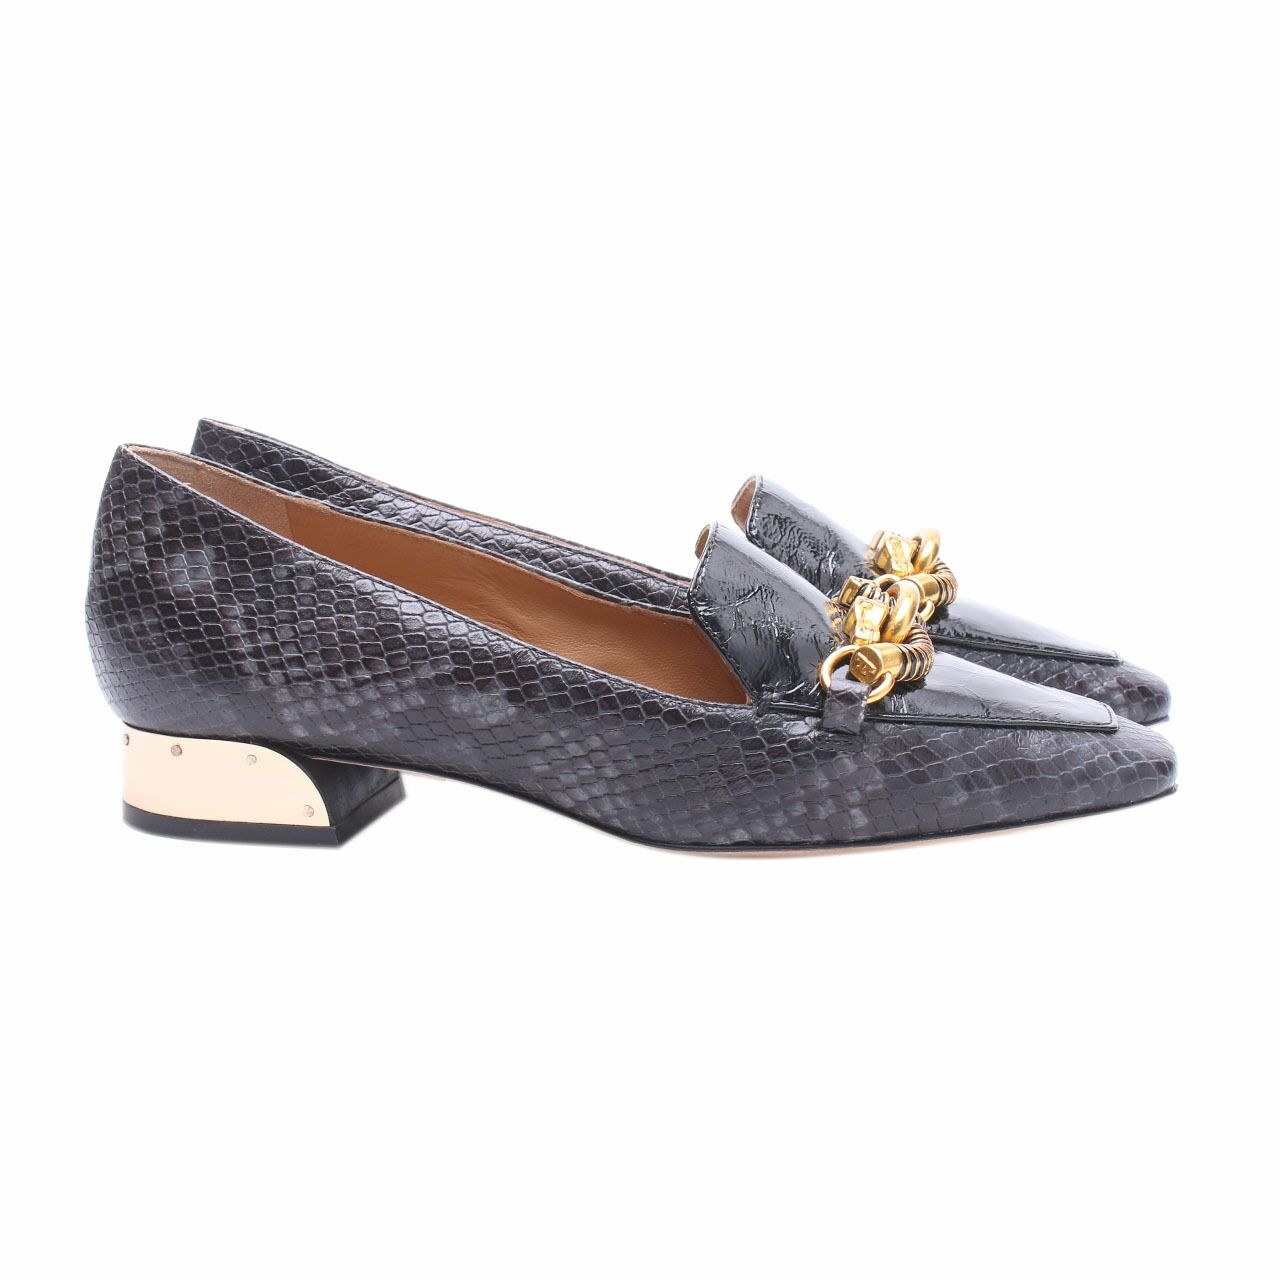 Tory Burch Jessa Stamped Snake Printed  Perfect Black Loafers Flats